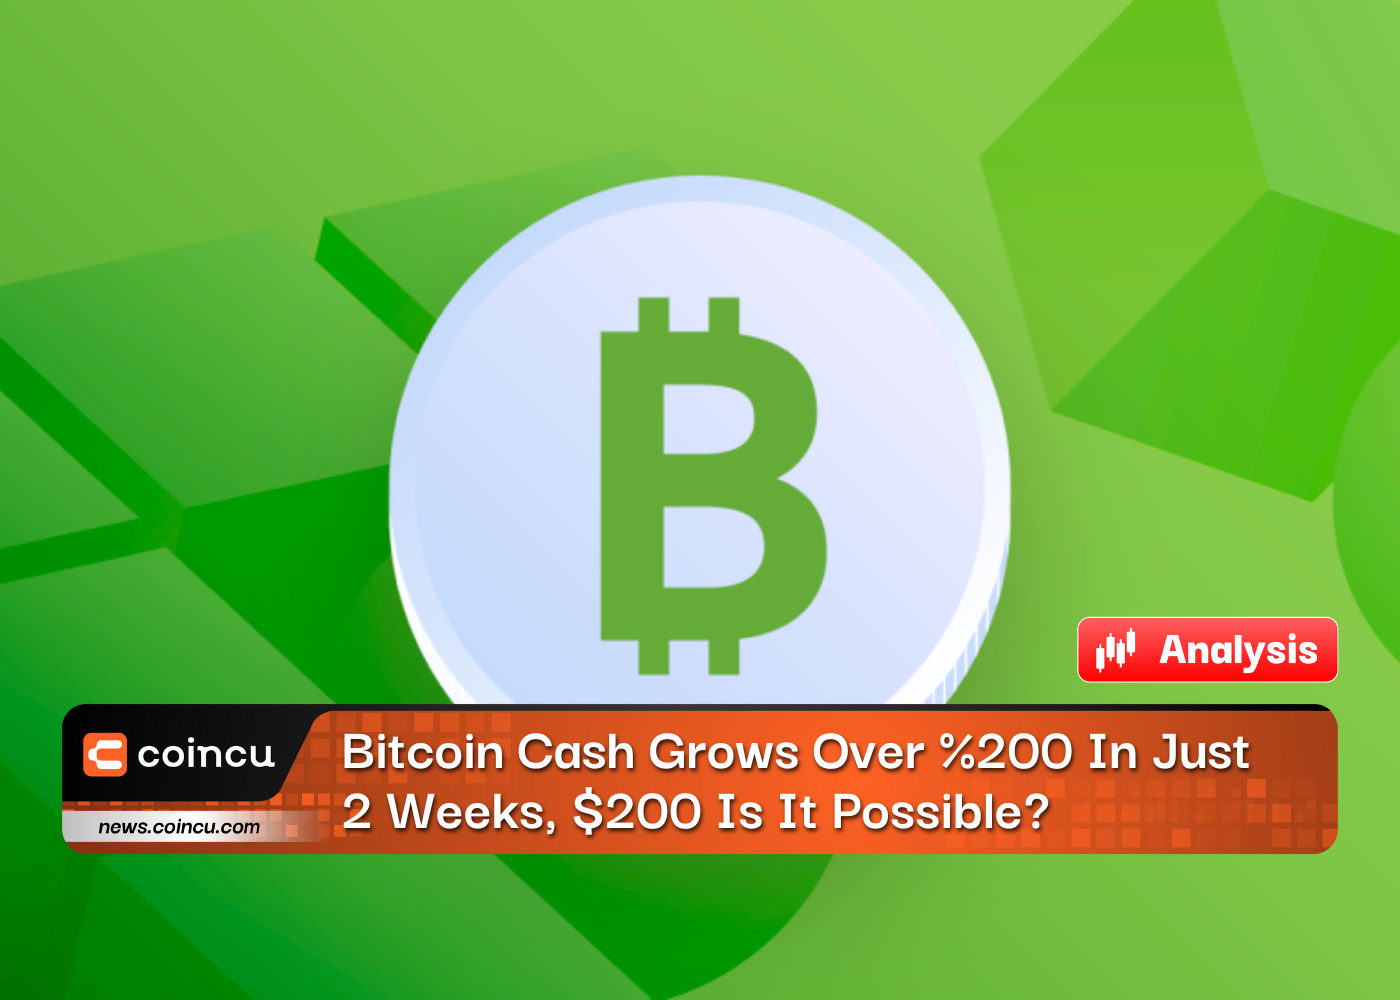 Bitcoin Cash Grows Over %200 In Just 2 Weeks, $200 Is It Possible?